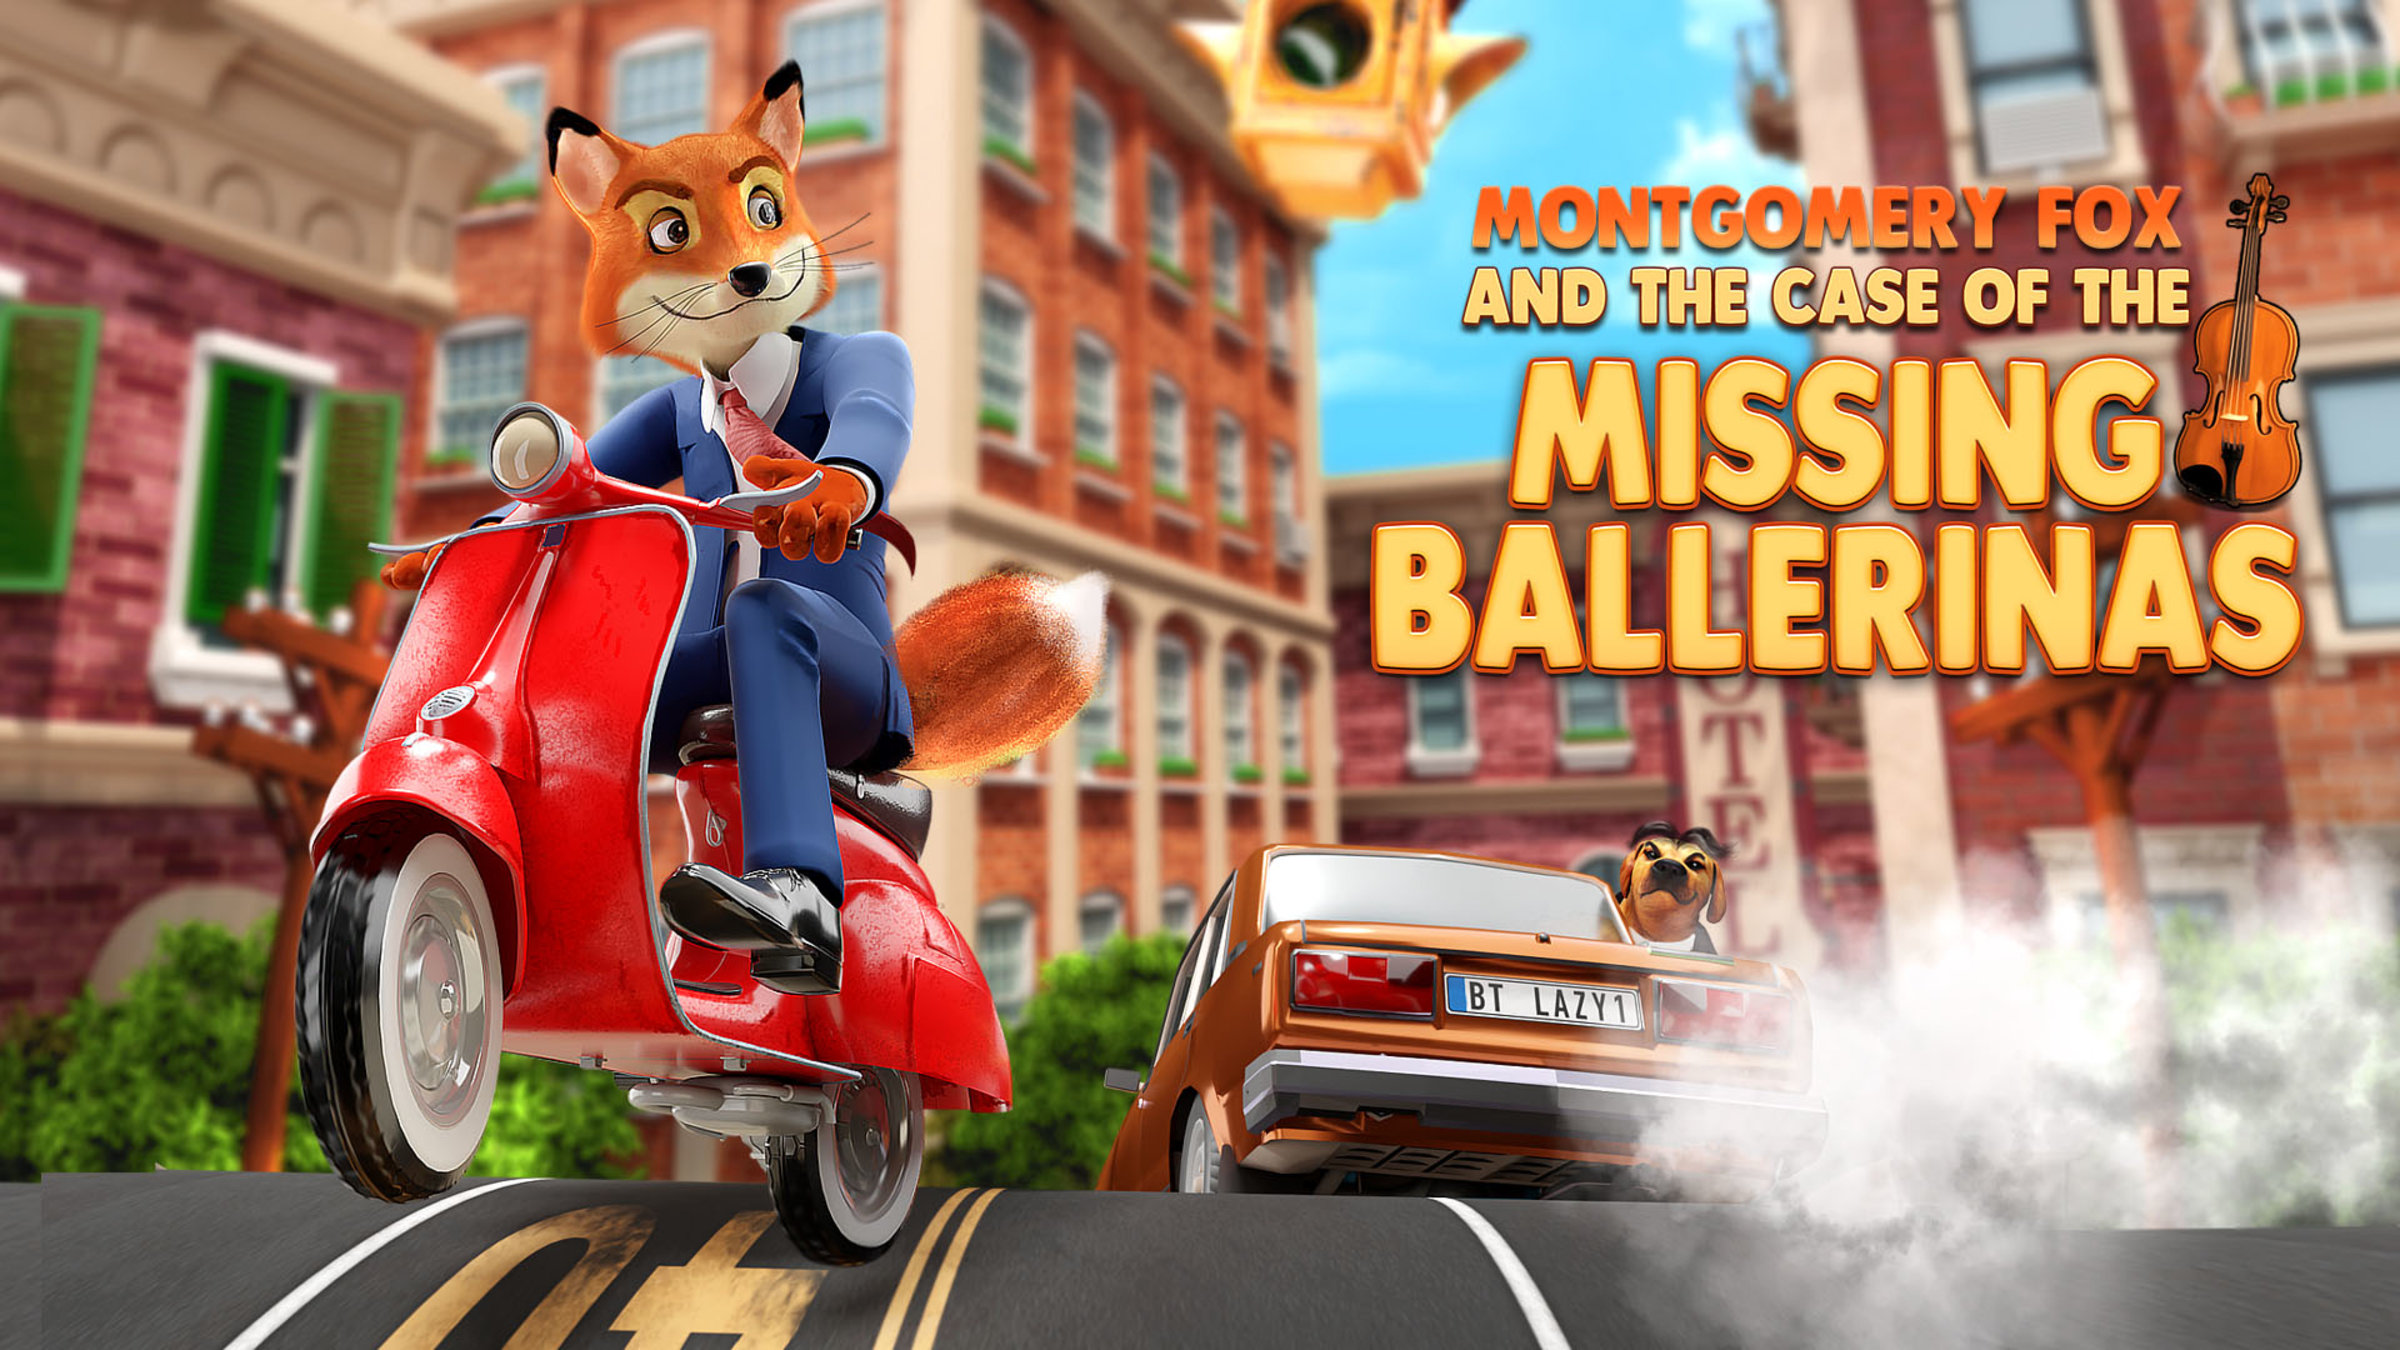 https://assets.nintendo.com/image/upload/c_fill,w_1200/q_auto:best/f_auto/dpr_2.0/ncom/en_US/games/switch/m/montgomery-fox-and-the-case-of-the-missing-ballerinas-switch/